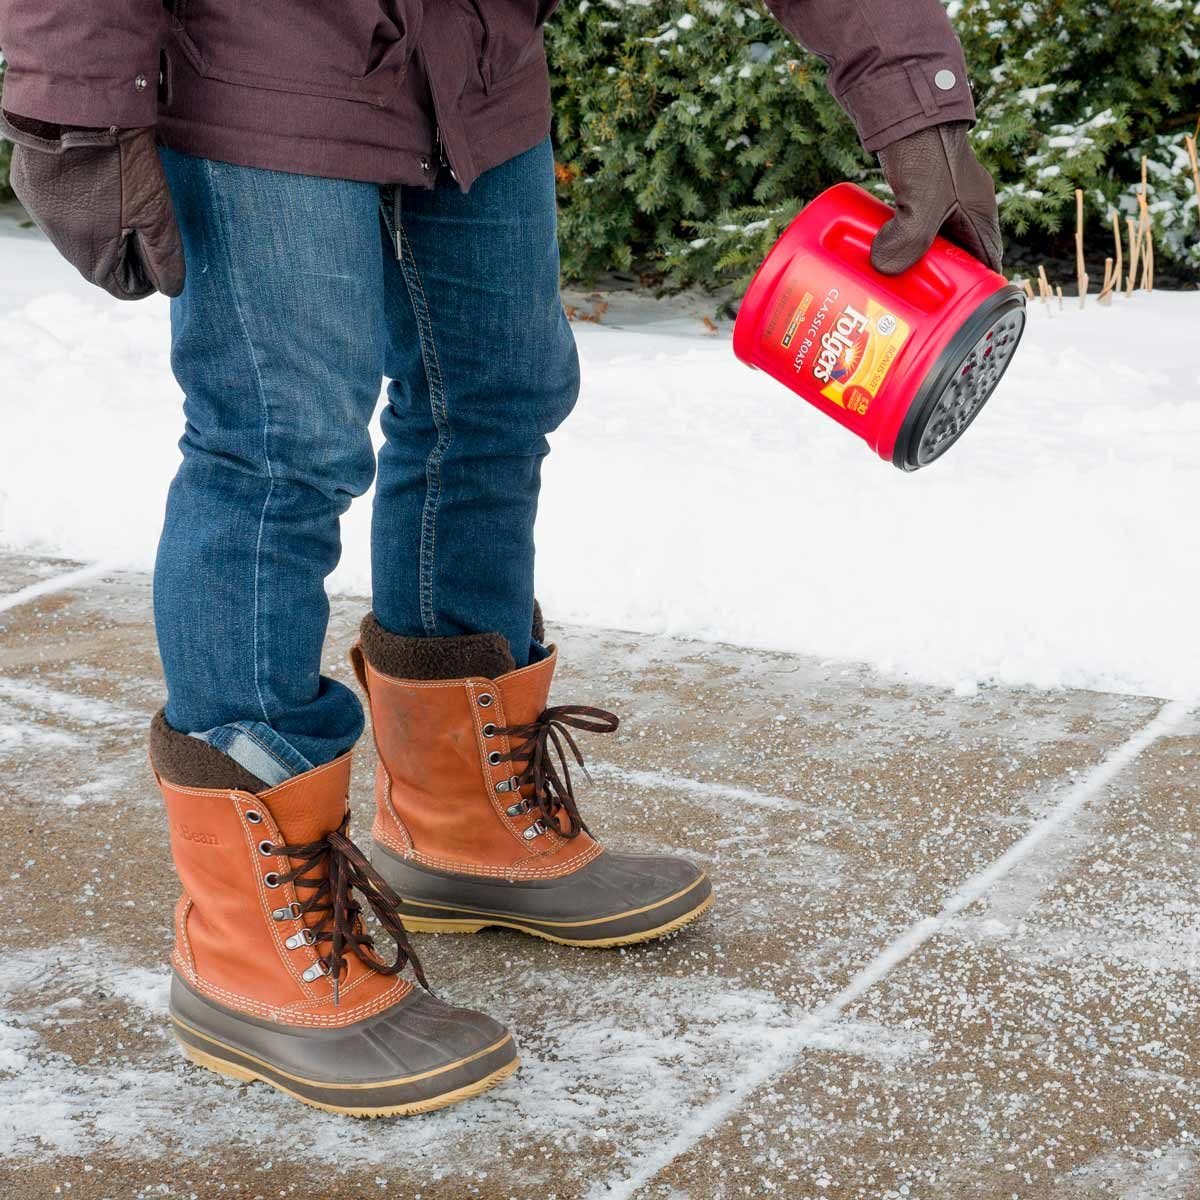 Try using a salt alternative at your home this winter and help